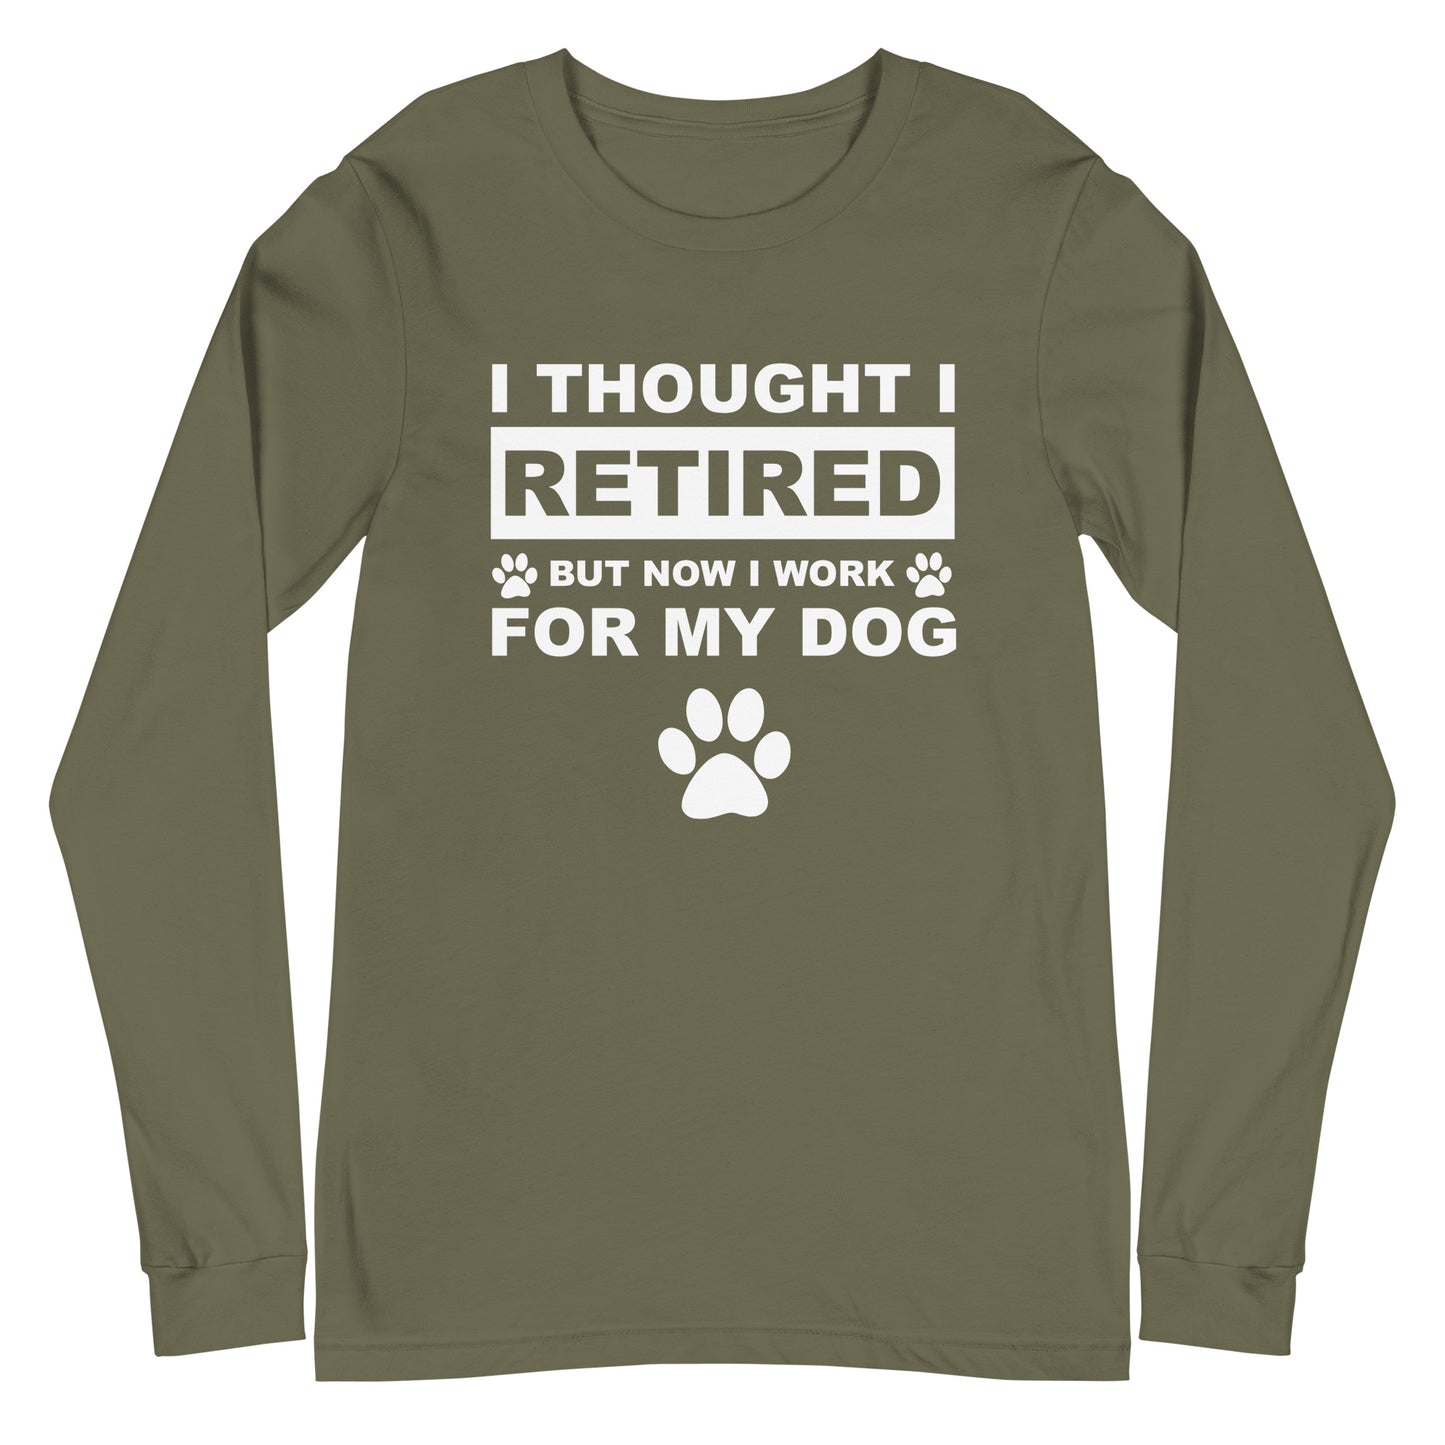 I Thought I Retired But Now I Work for My Dog Unisex Long Sleeve Tee